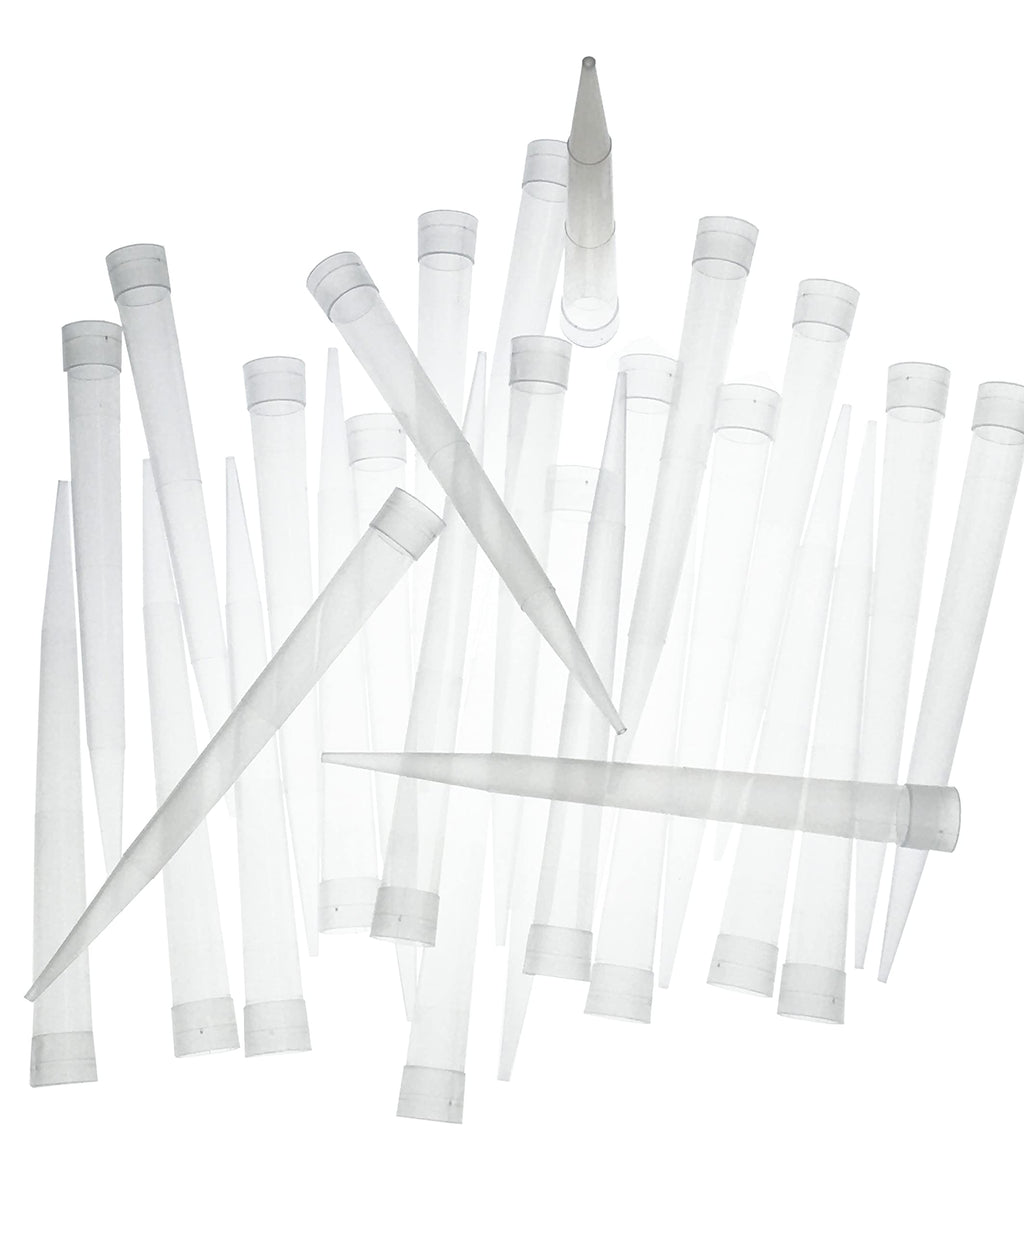 100 Pcs 10ml Laboratory Plastic Pipettor Tips, 10ml Plastic Pipette Tips, Polypropylene, Clear (10ml)